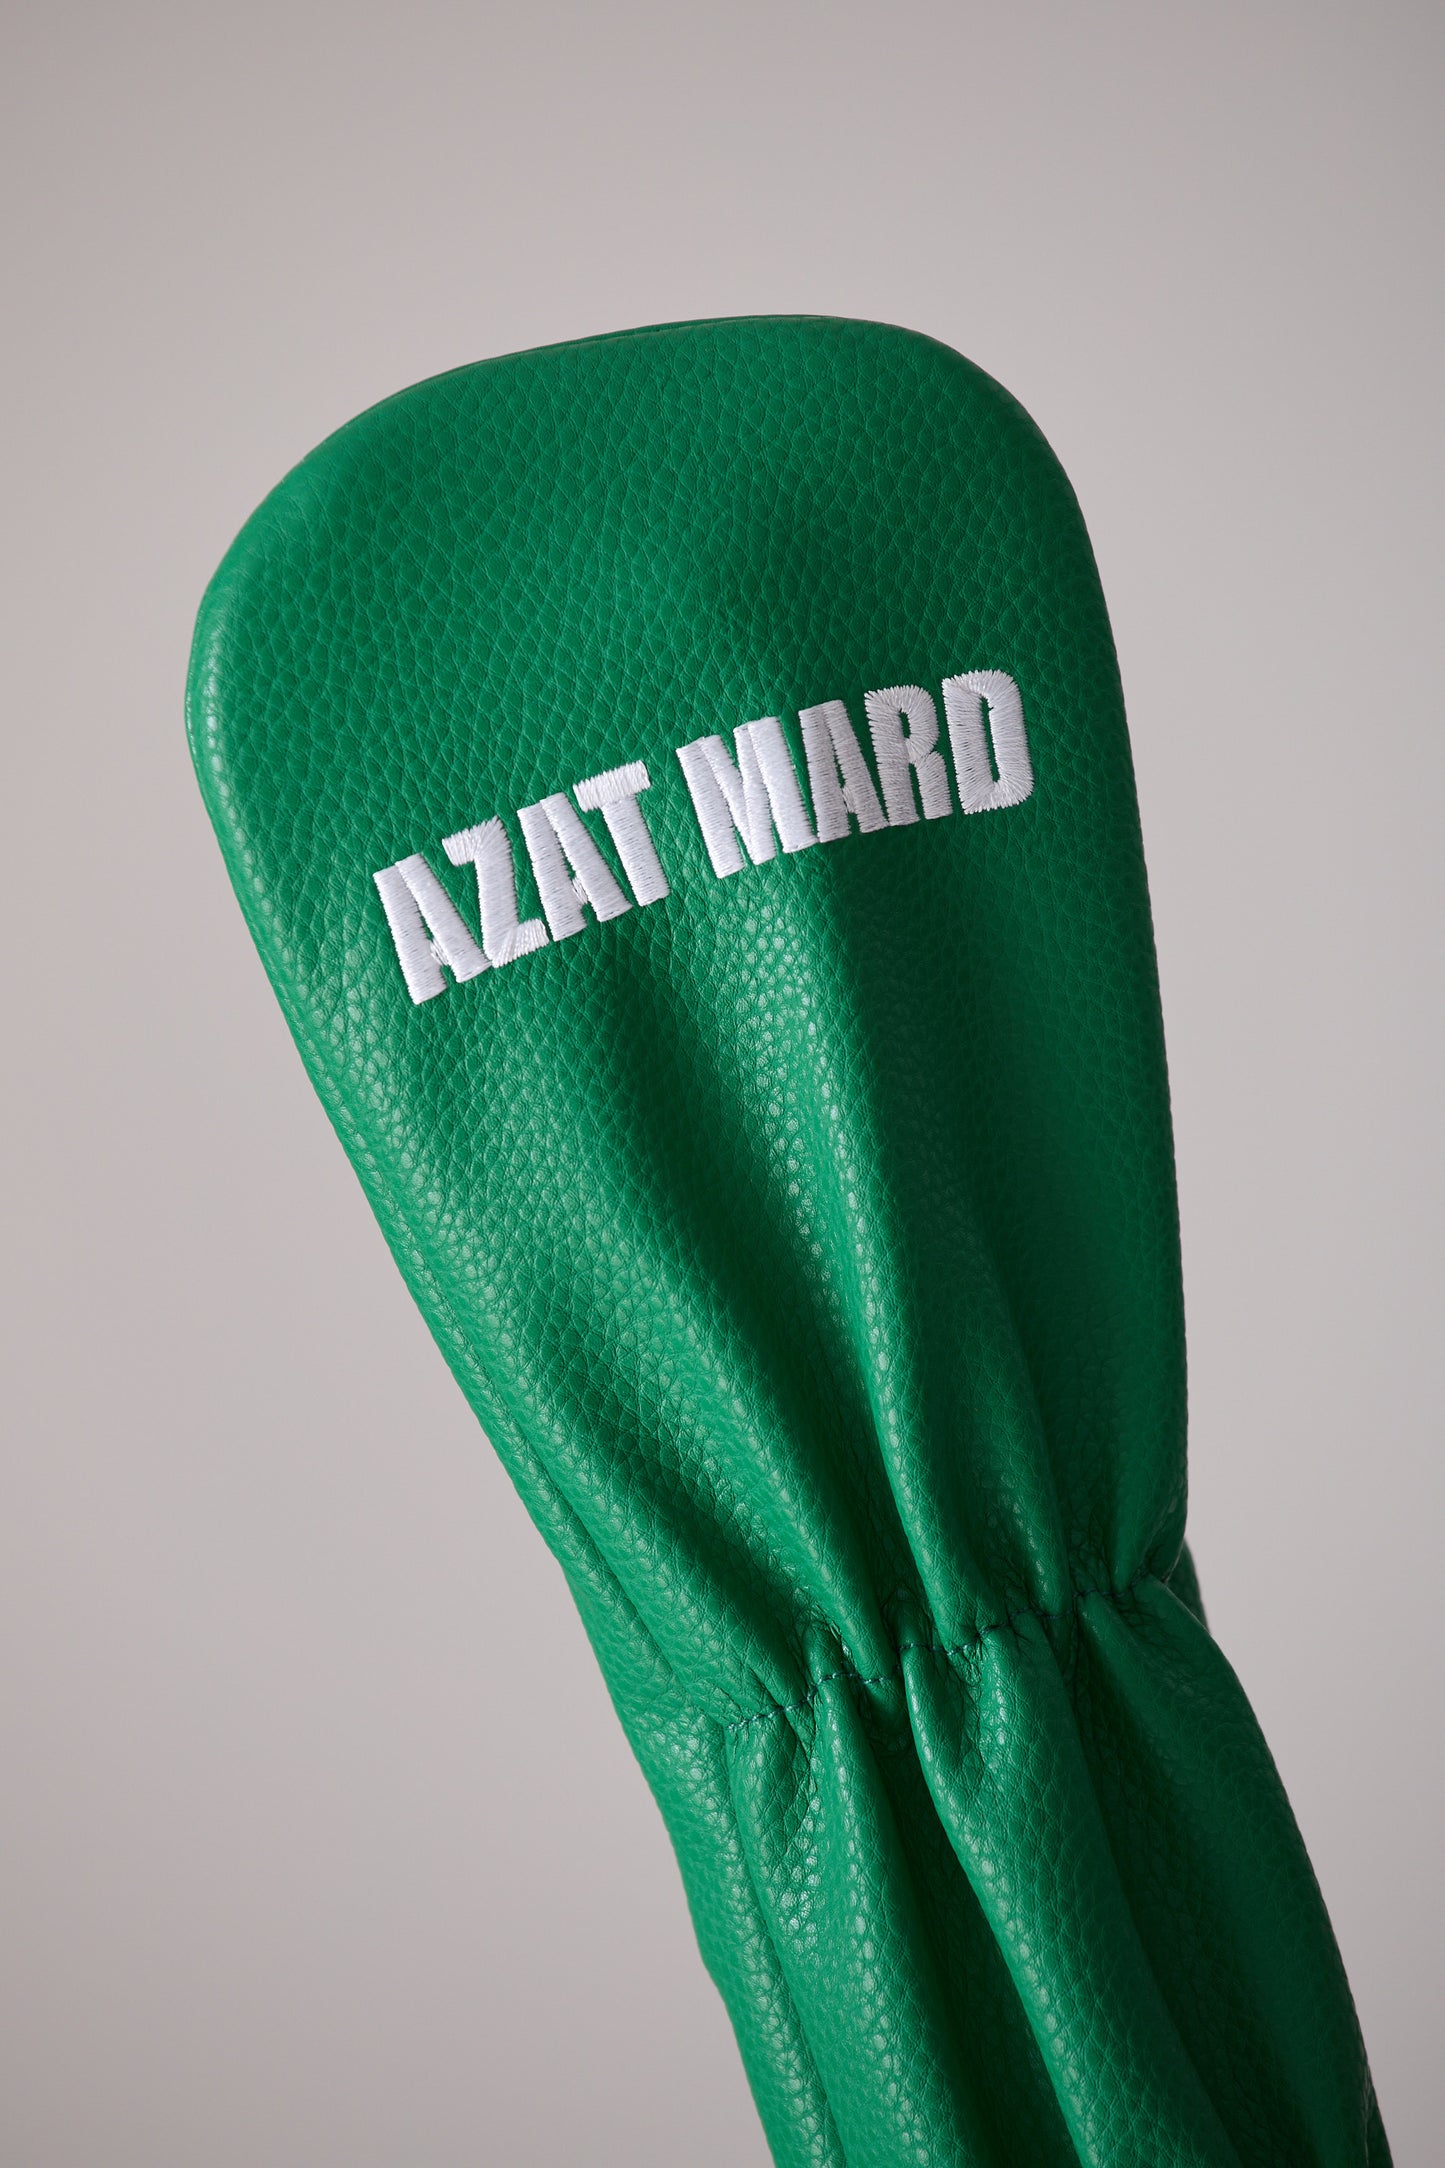 LIMITED EDITION 3 WOOD GOLF HEAD COVER